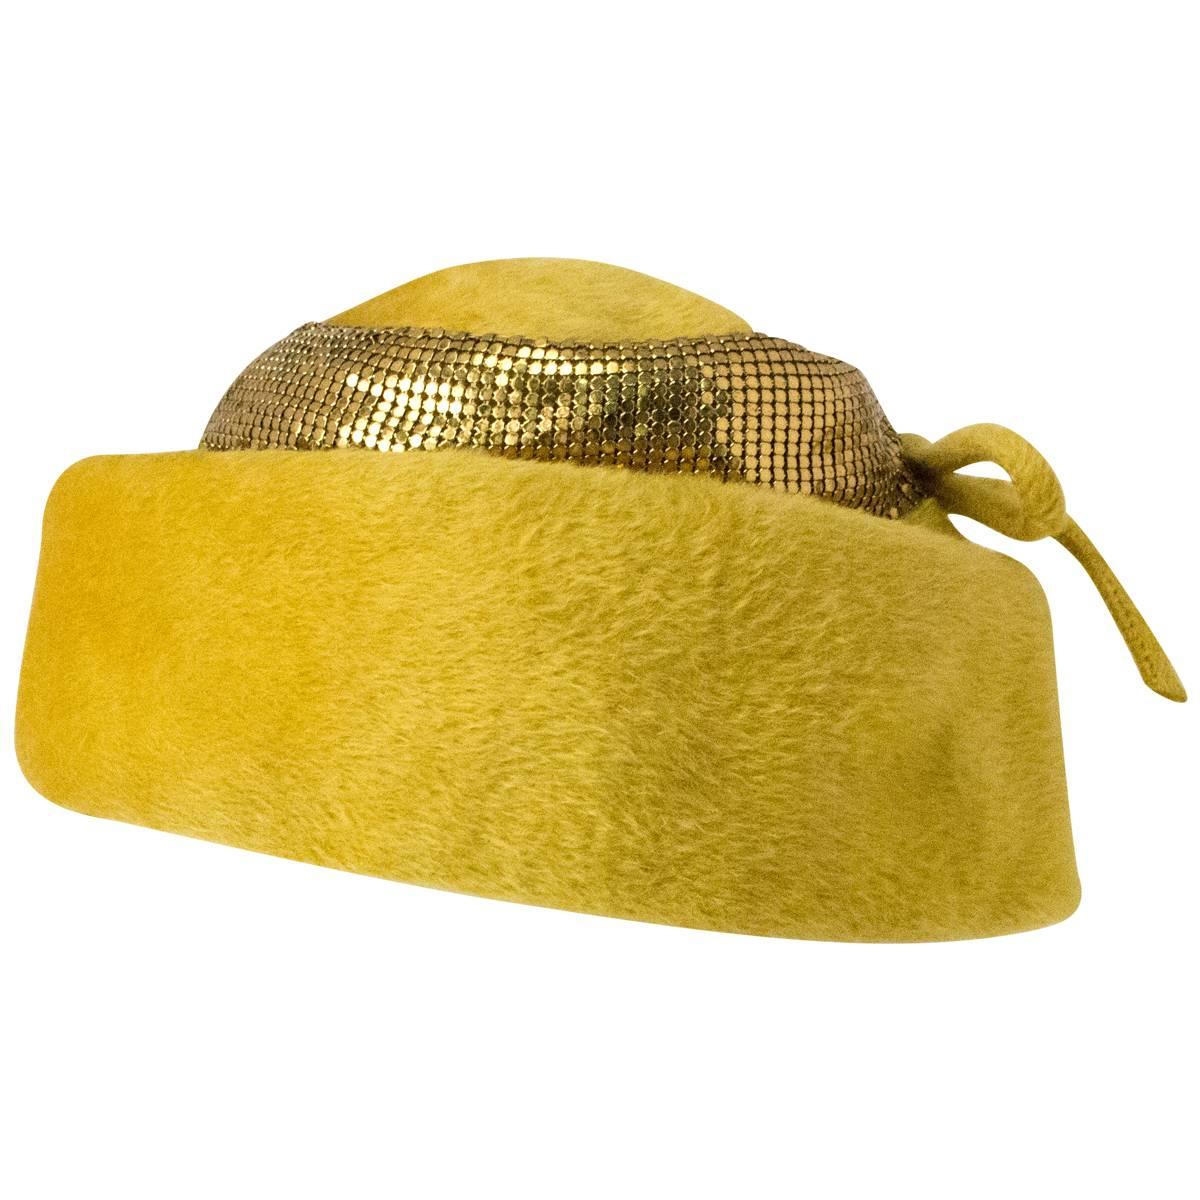  50s Leslie James Mustard Structured Hat with Metal Mess Trim  For Sale